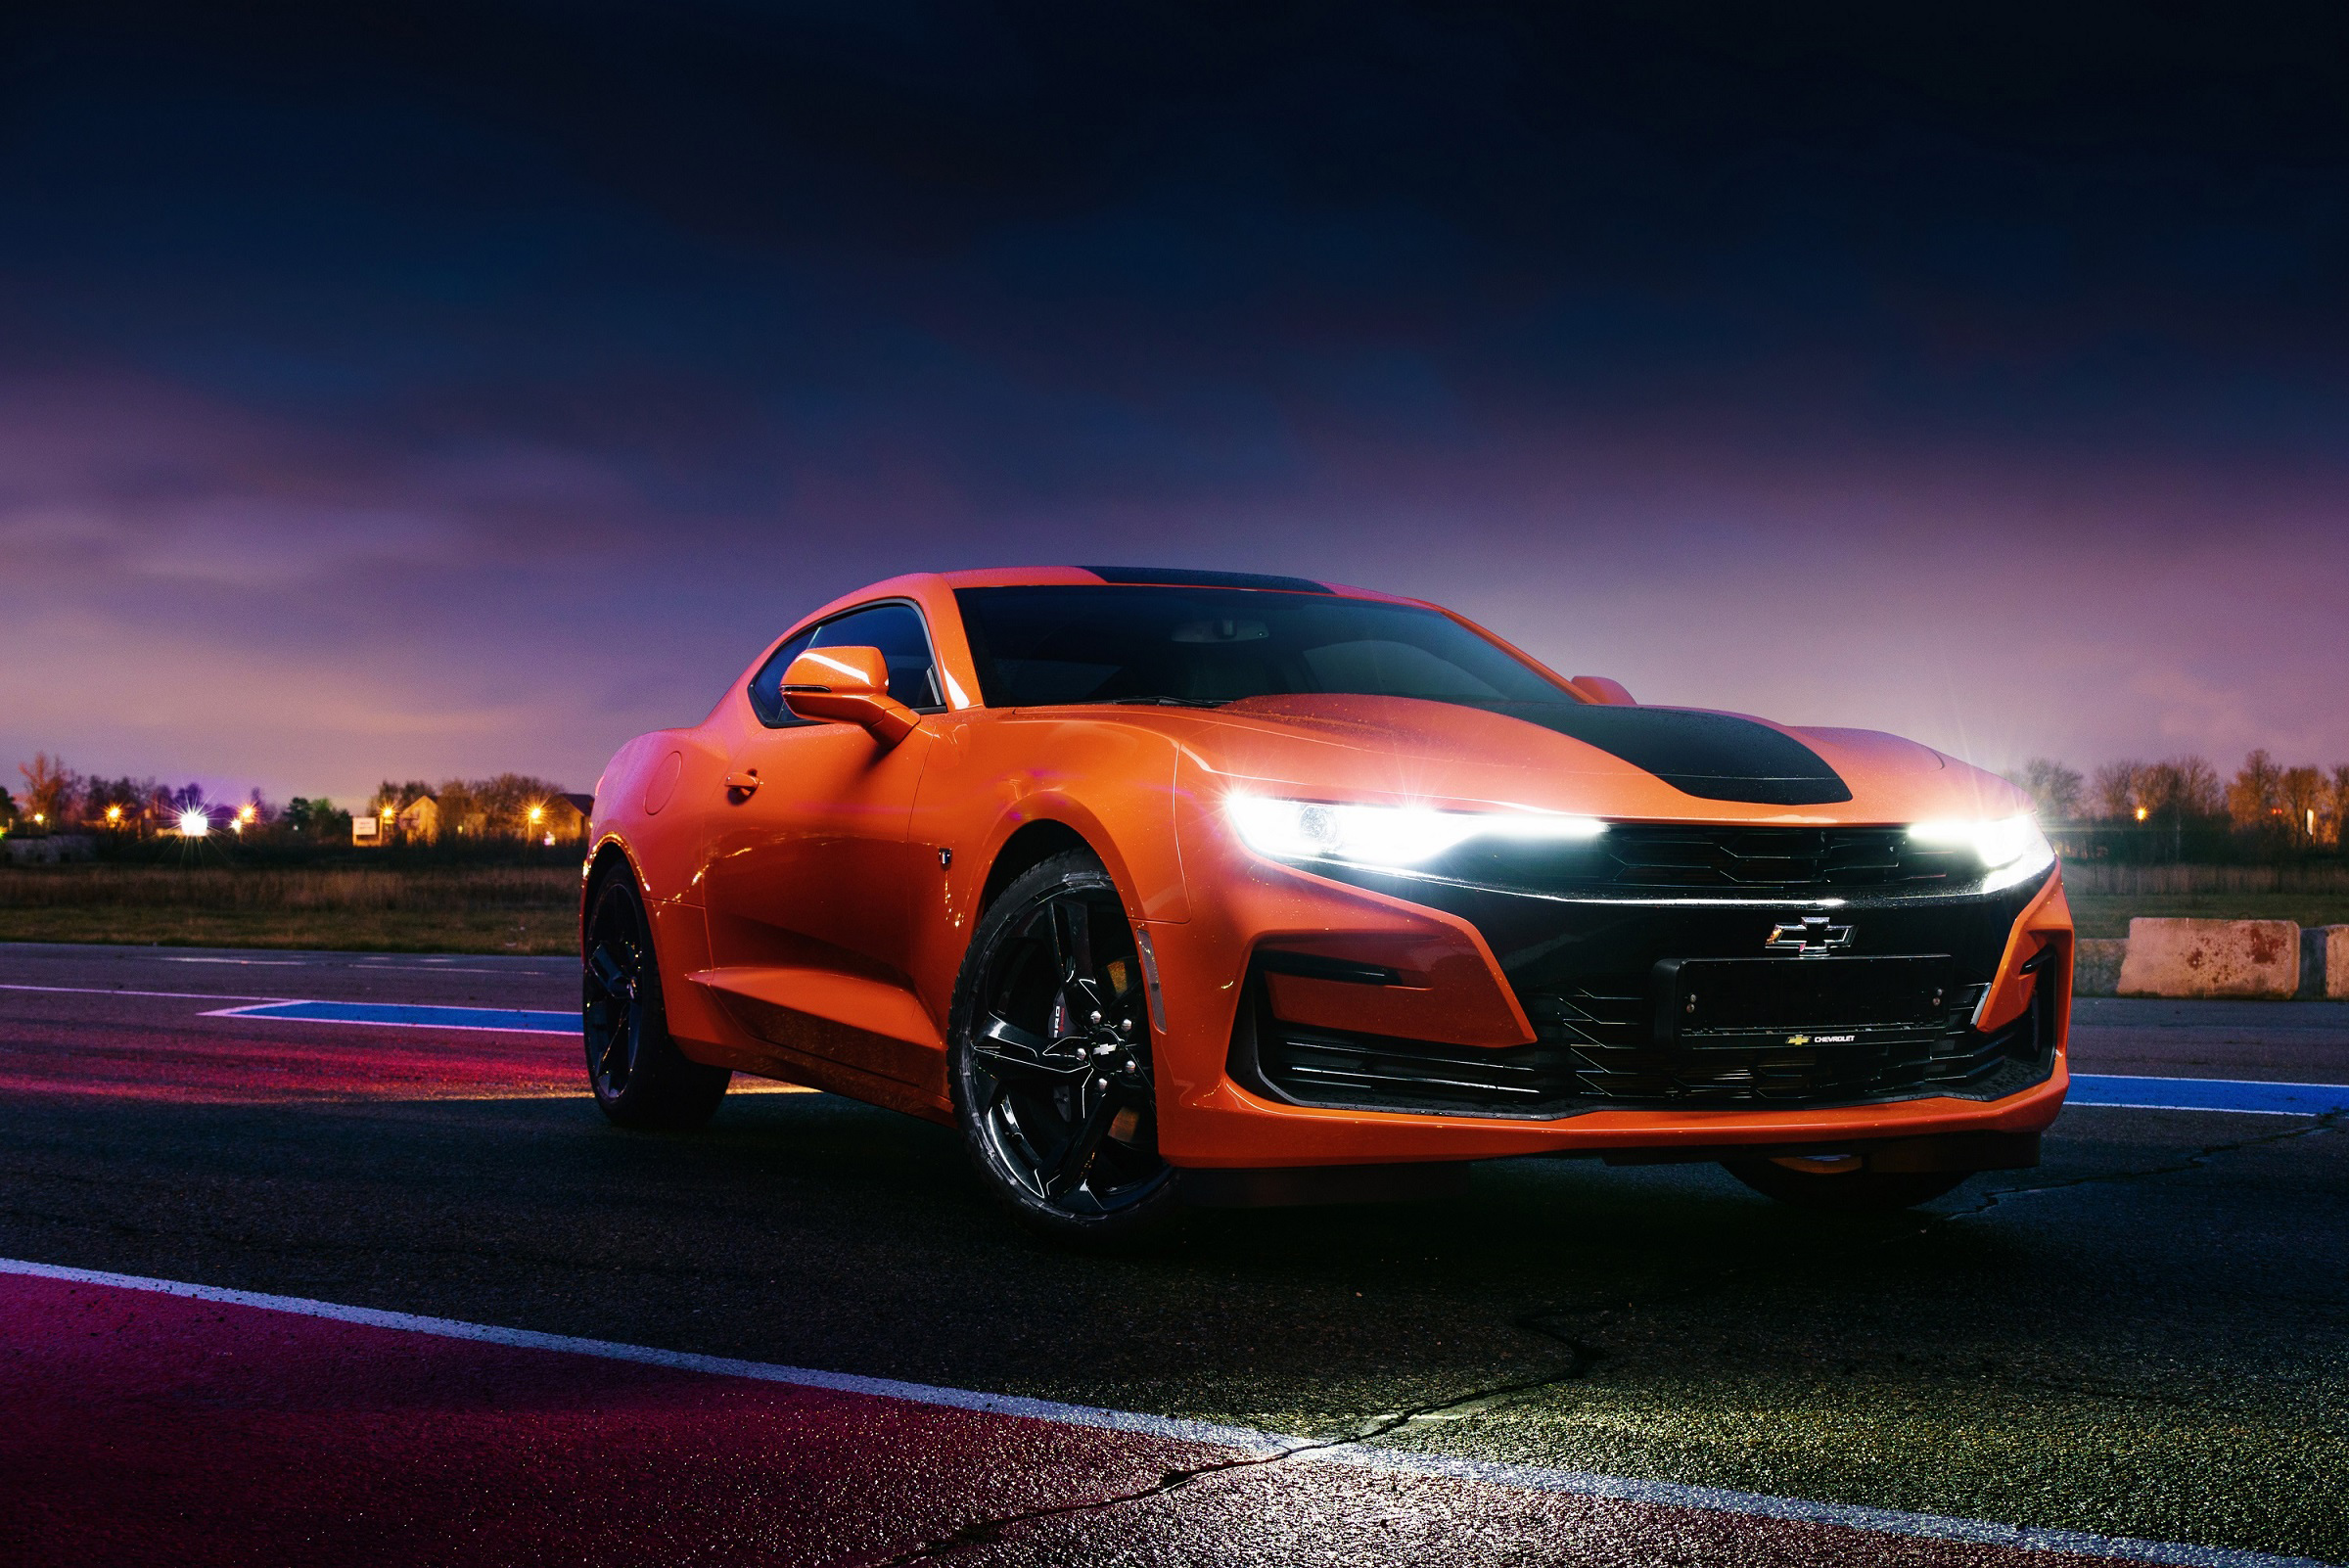 Chevrolet Camaro 2018, HD Cars, 4k Wallpapers, Images ...